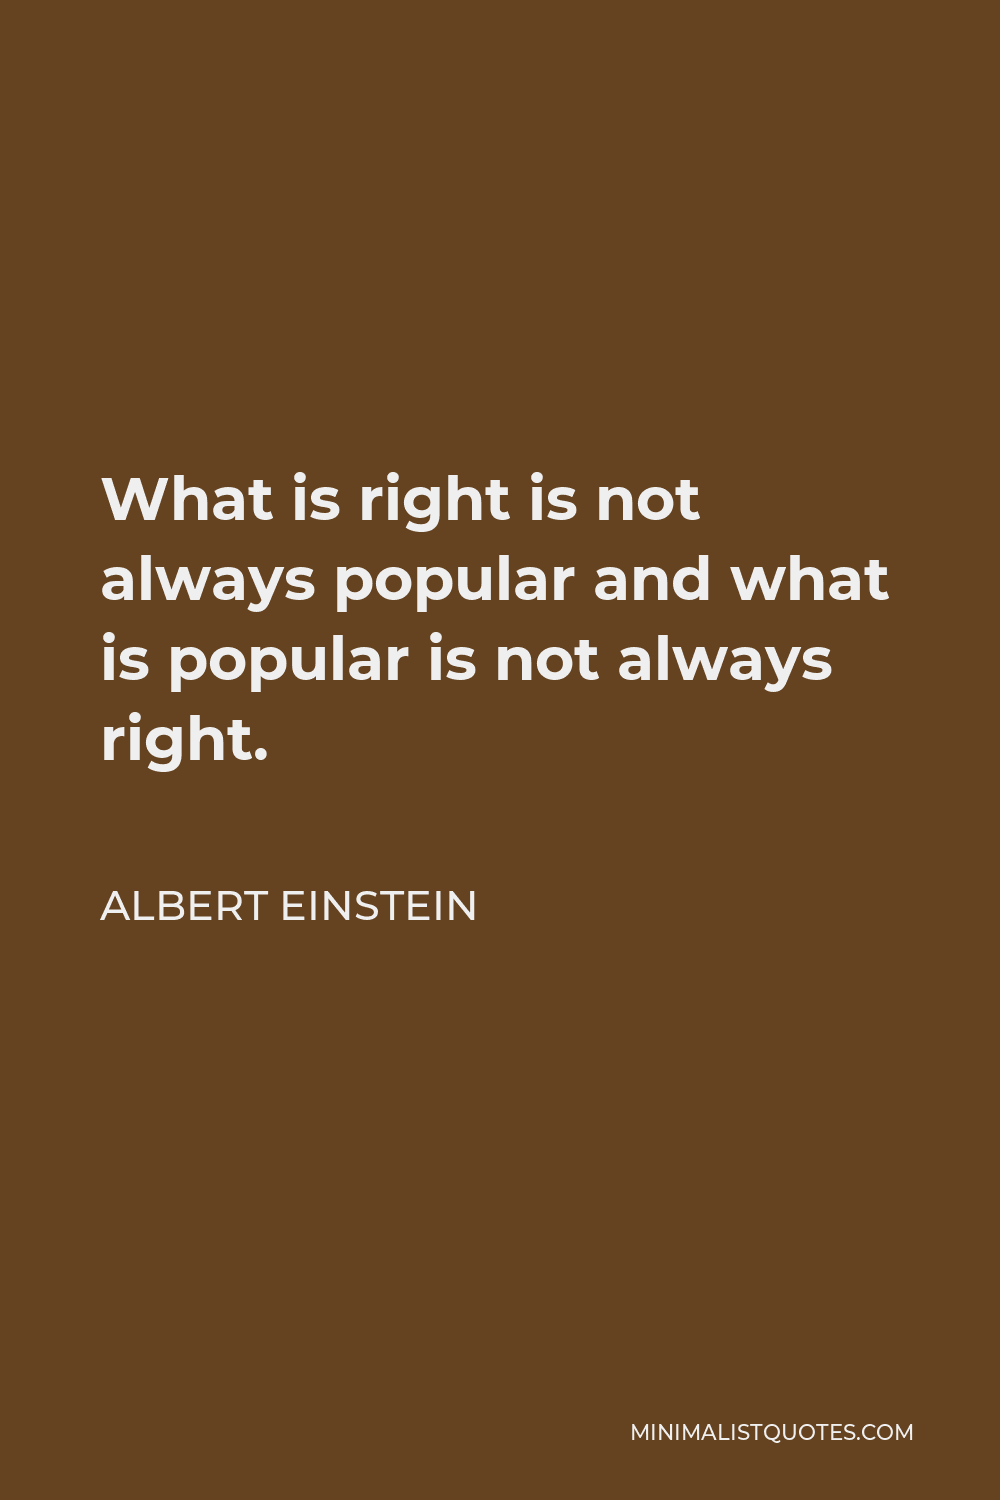 Albert Einstein Quote - What is right is not always popular and what is popular is not always right.